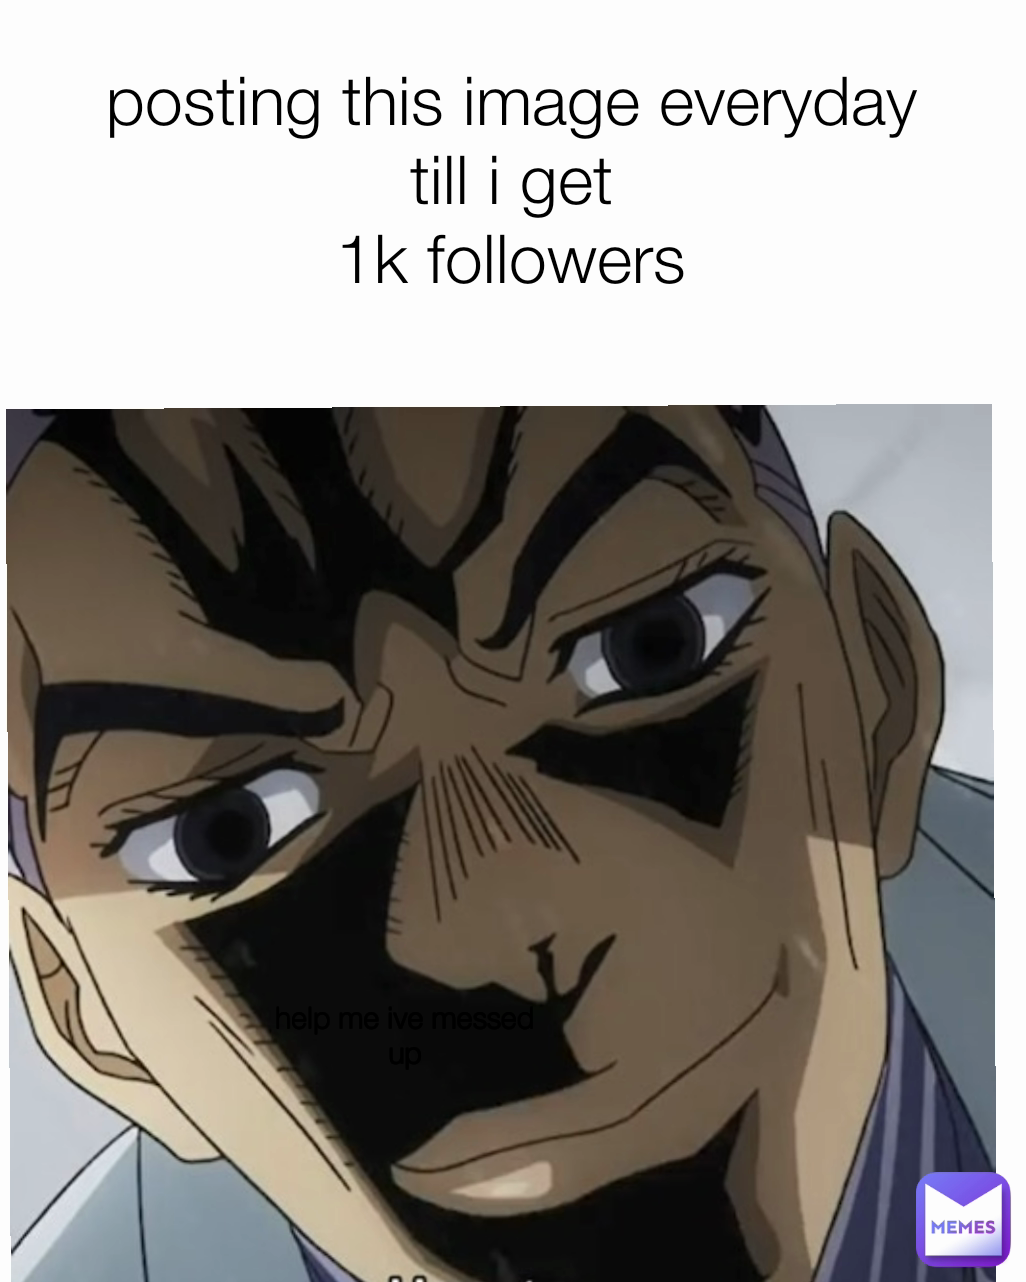 help me ive messed up posting this image everyday till i get
1k followers